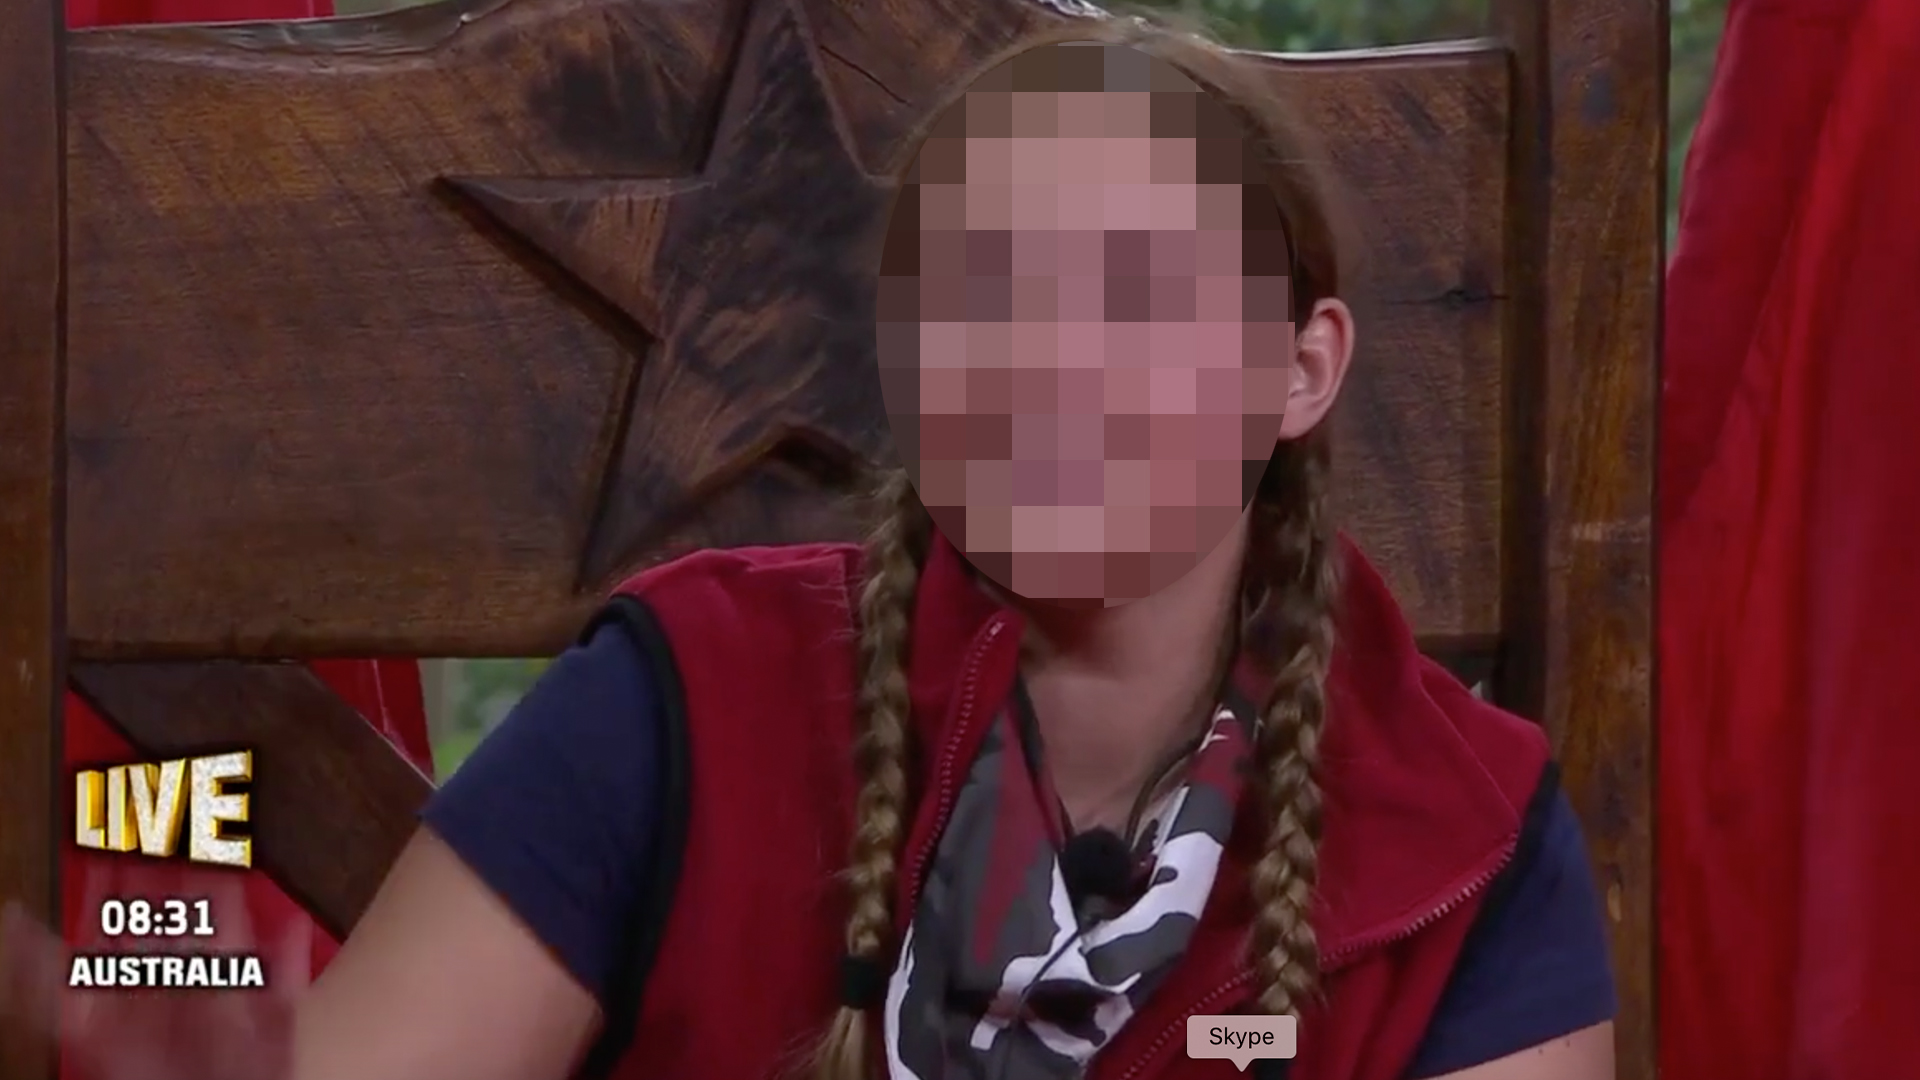 I'm A Celebrity... Get Me Out of Here winner